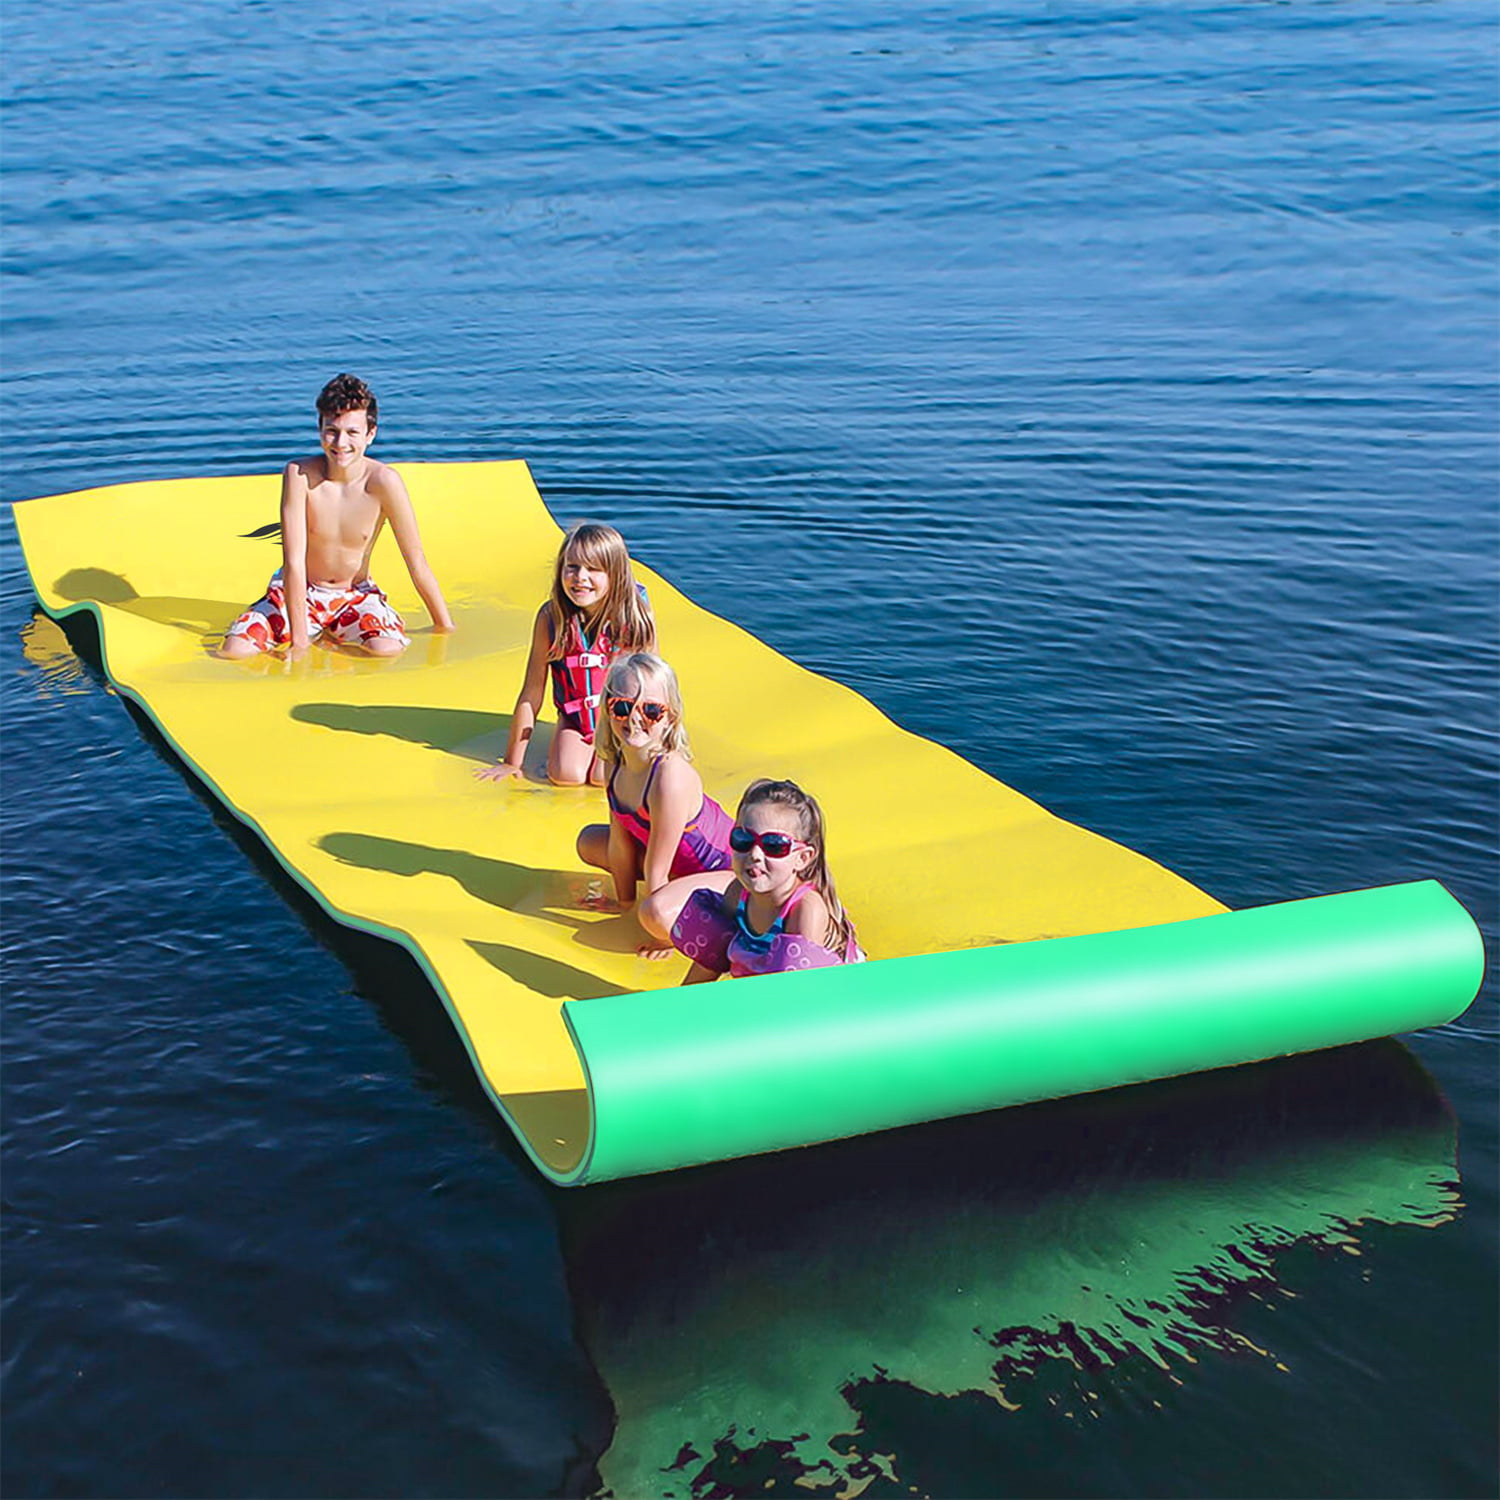 Details about   New 3 Layer 9'x 6' Floating Oasis Water Play Foam Pad Mat Float Lakes Pink Rafts 